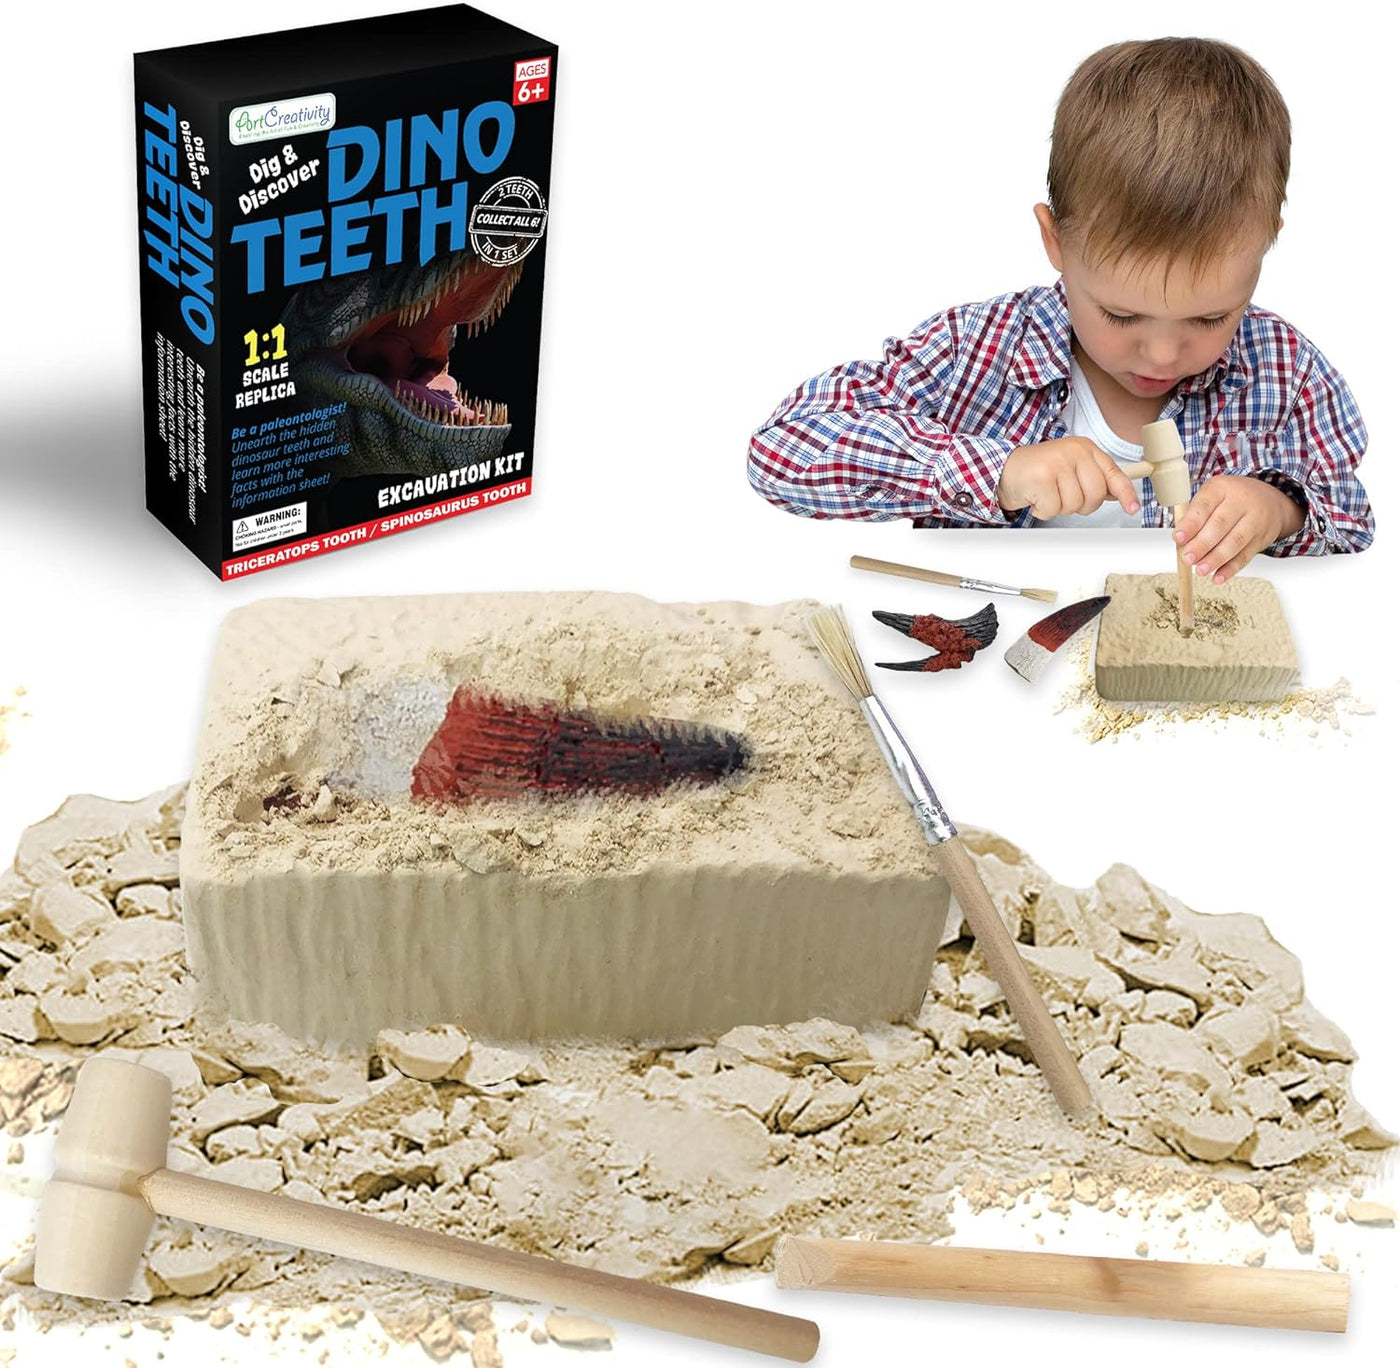 ArtCreativity Dino Teeth Dig and Discover Excavation Kit for Kids, Includes Triceratops and Spinosaurus Toy Fossil Teeth with 2 Digging Tools, Interactive Dinosaur Gifts for Boys and Girls